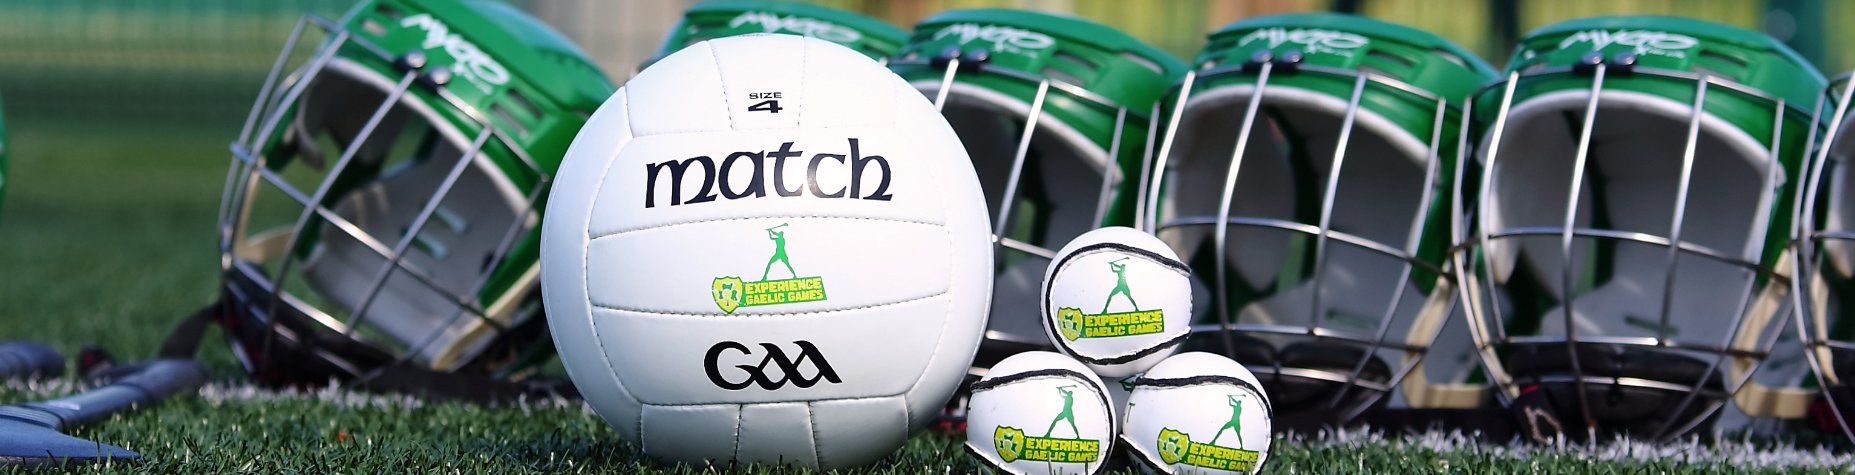 Helmets, Balls and Bats on an Astroturf Training Ground Ahead of the Gaelic Football Game